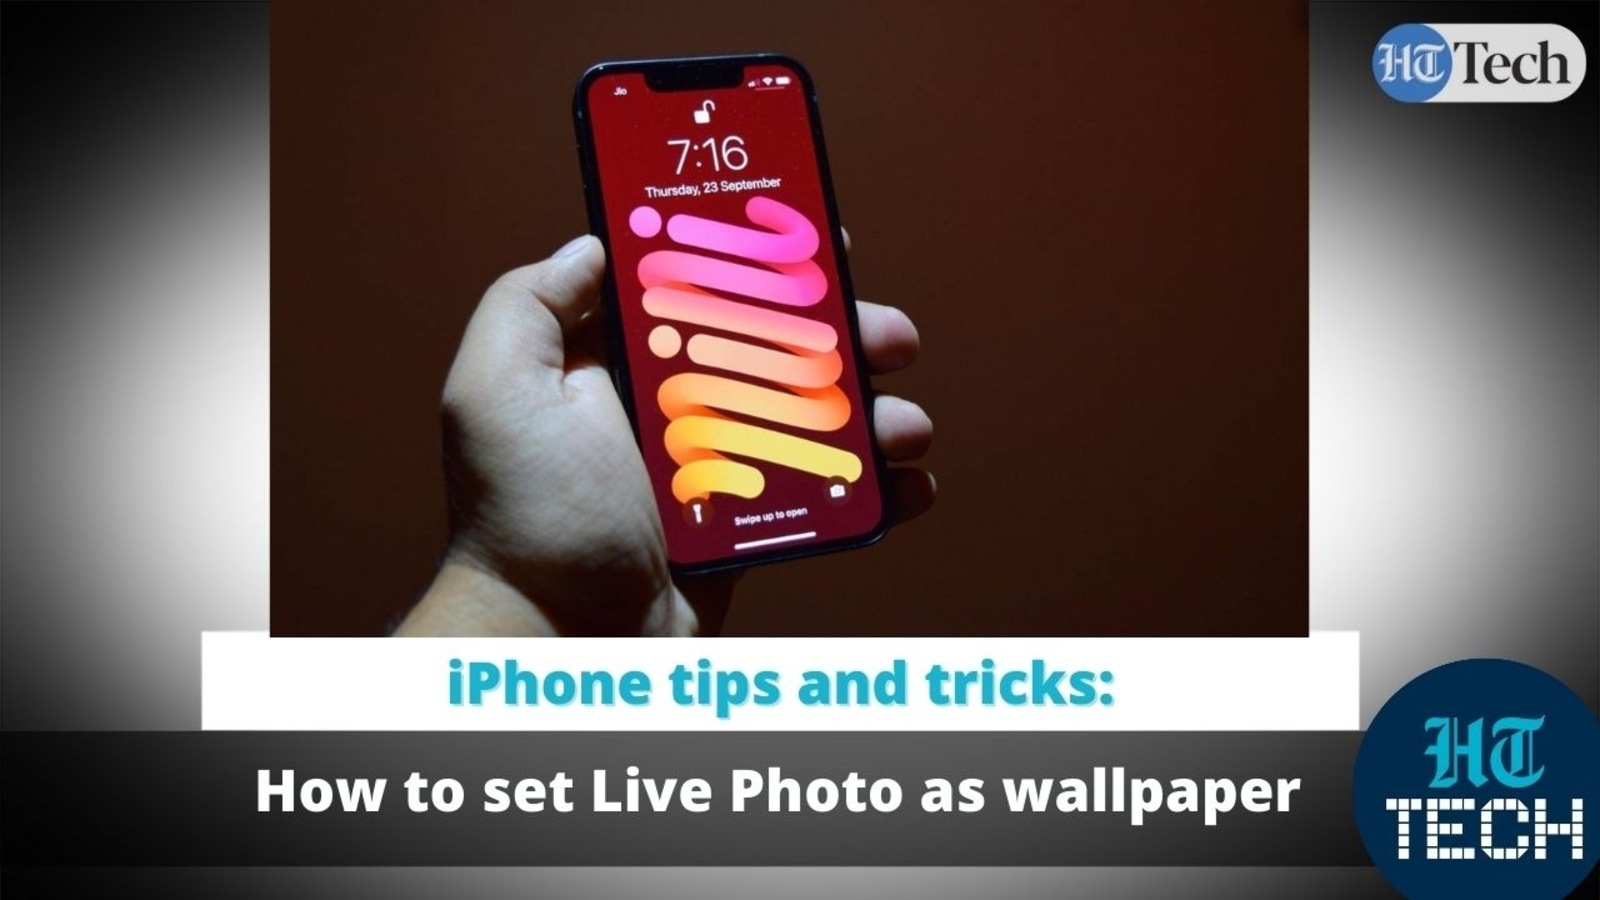 Iphone Tips How To Set Live Photo As Wallpaper On Iphone 13 Iphone 12 More Videos